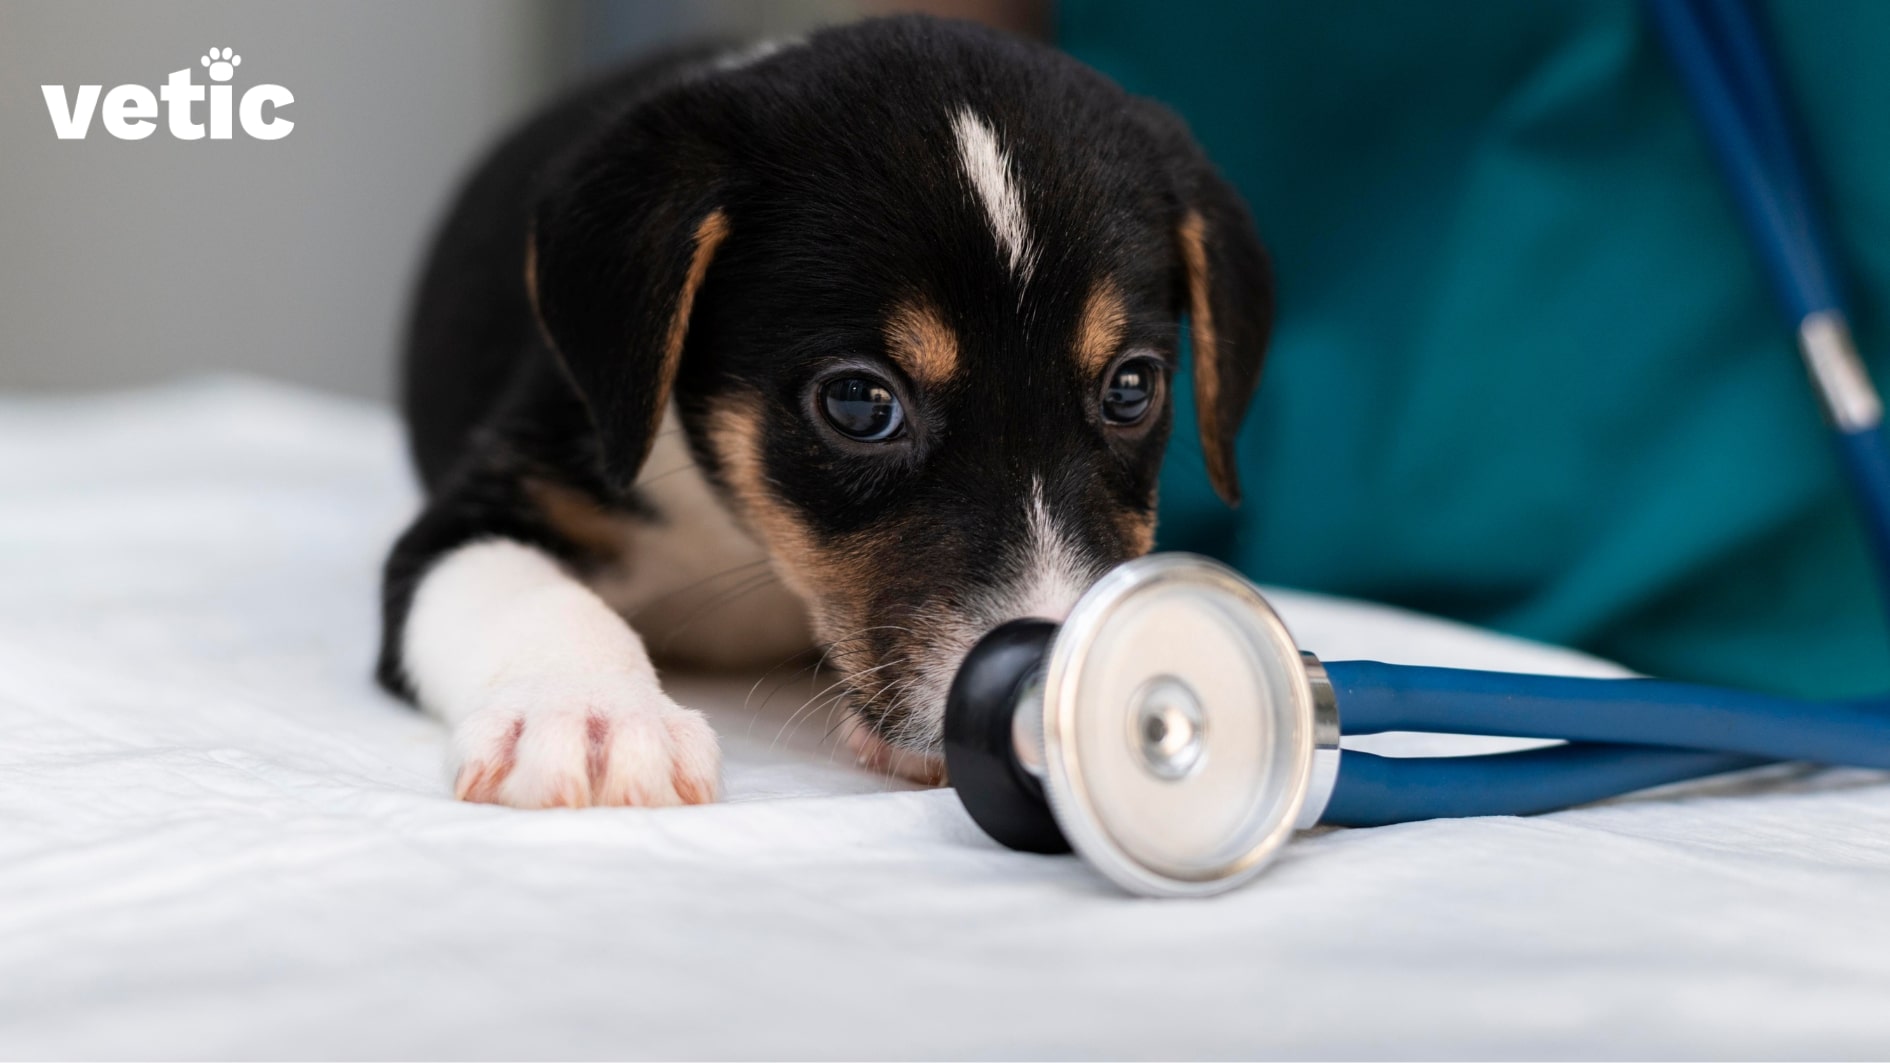 black puppy with white paws and brown-white mark on his head lying on the examination table sniffing the stethoscope kept in front waiting for his regular veterinary check-up